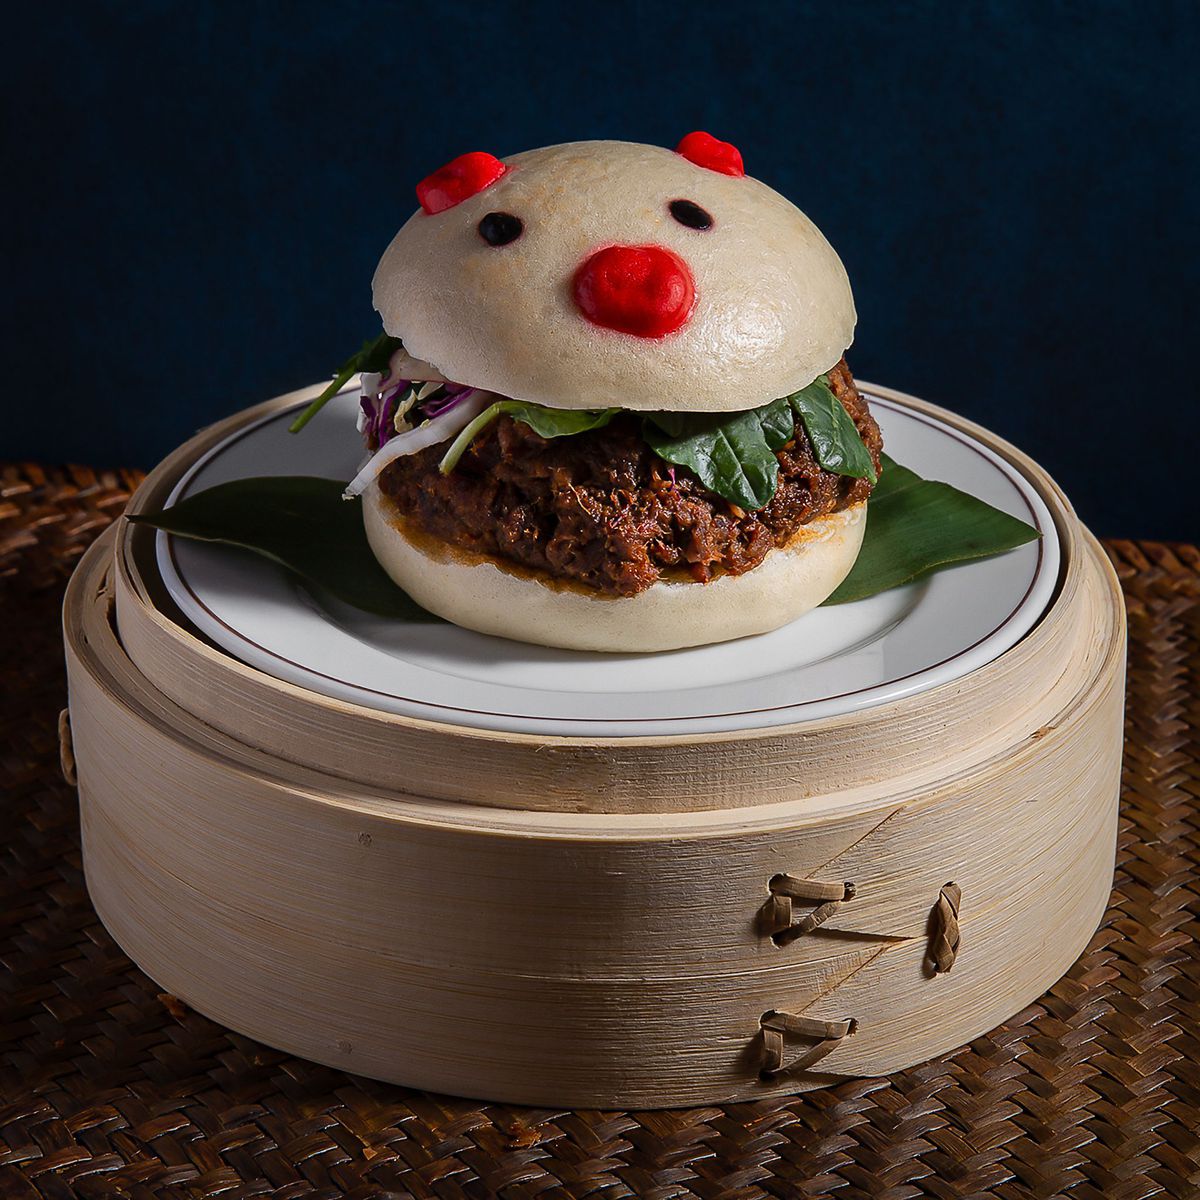 A pork bao sits on a steamer basket. The bao bun is pig-shaped and decorated.